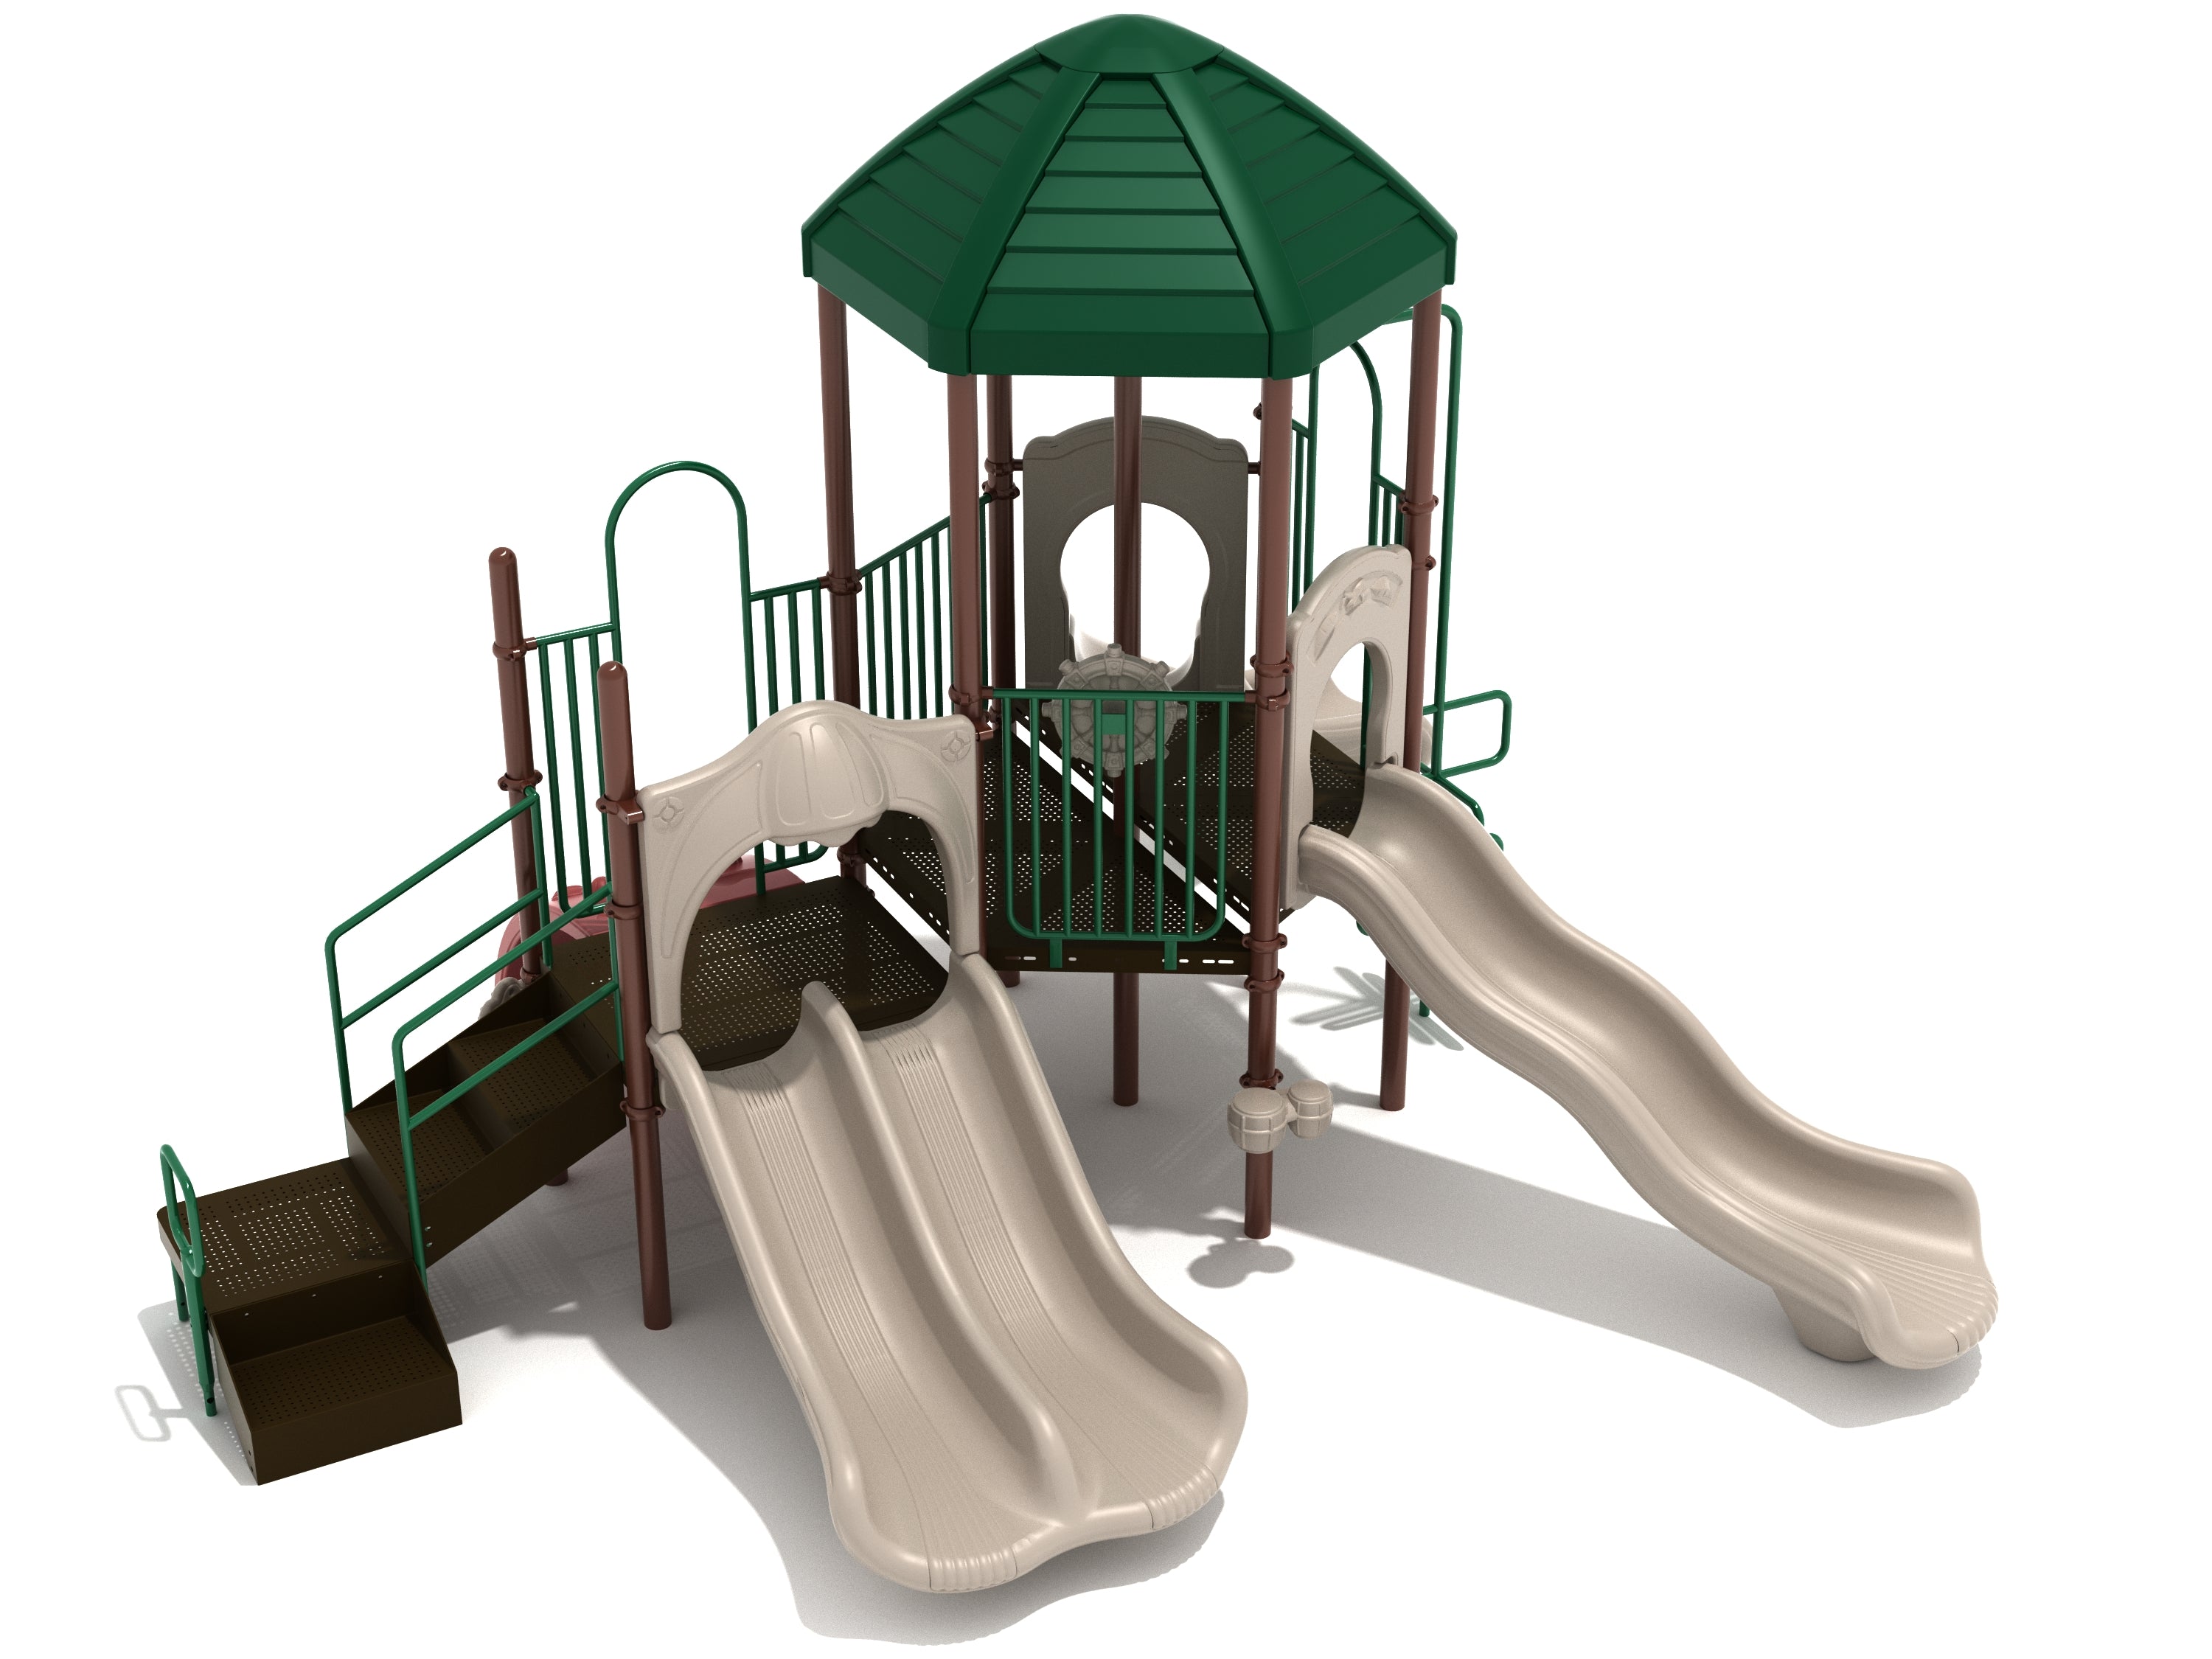 Rockford Playground Neutral Colors